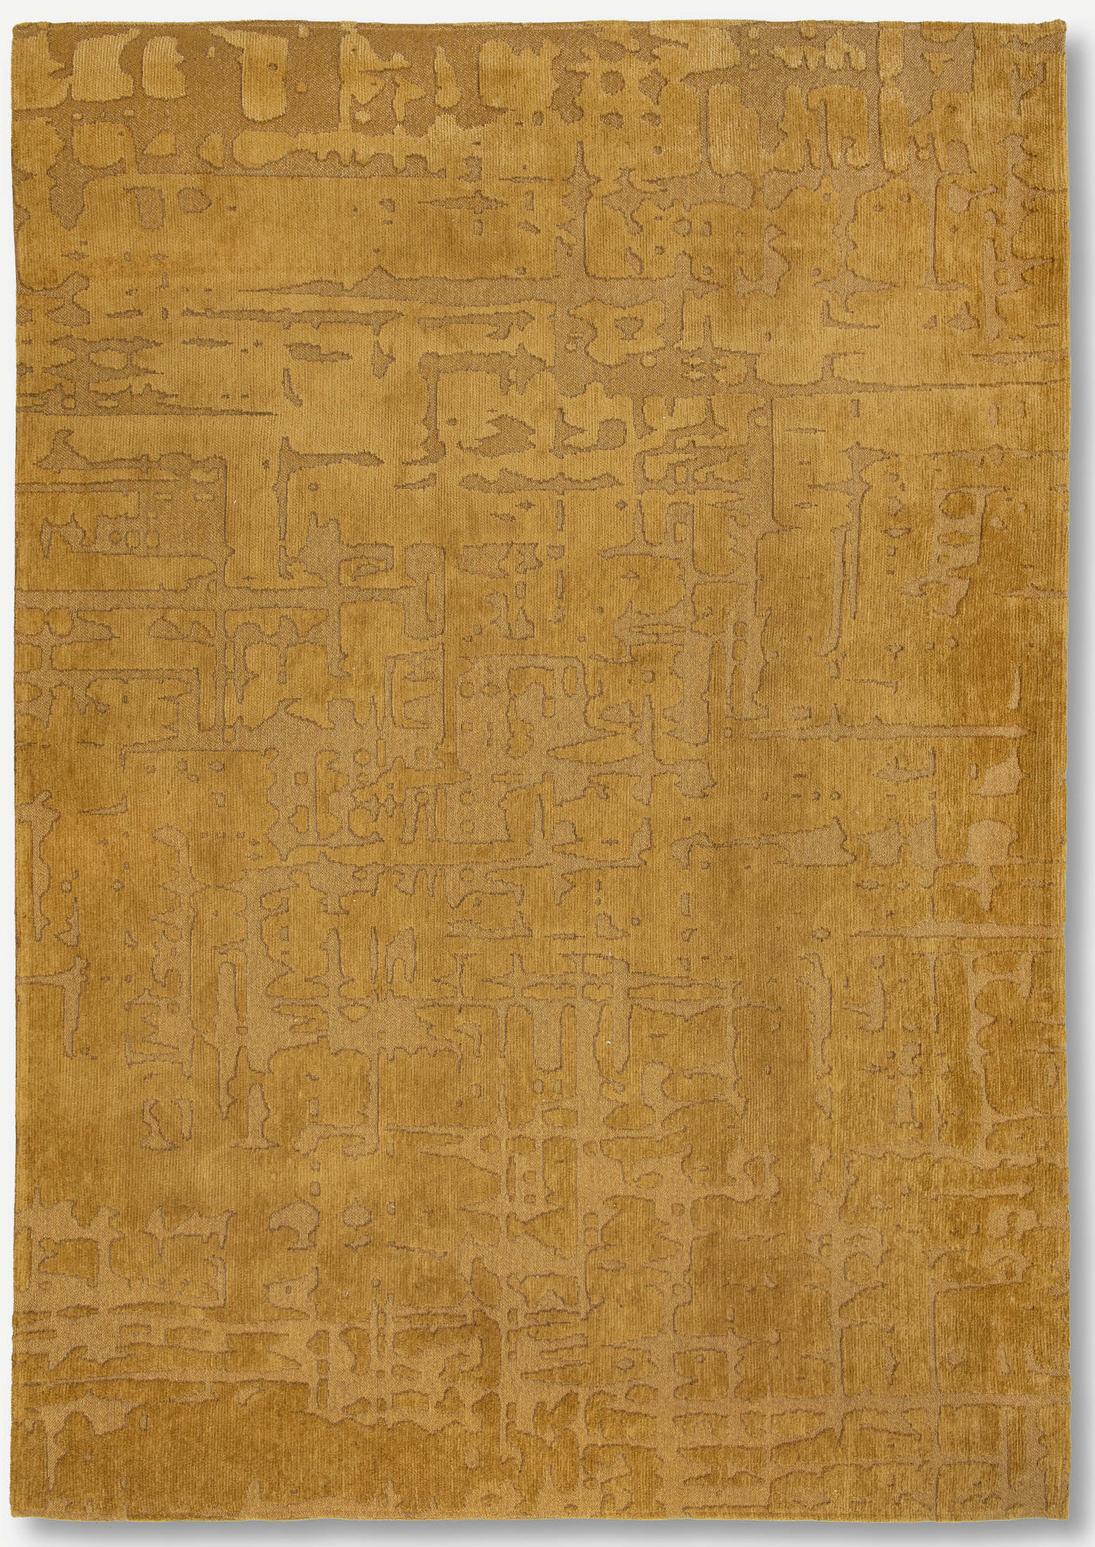 Abstract Gold Belgian Rug ☞ Size: 8' x 11' 2" (240 x 340 cm)